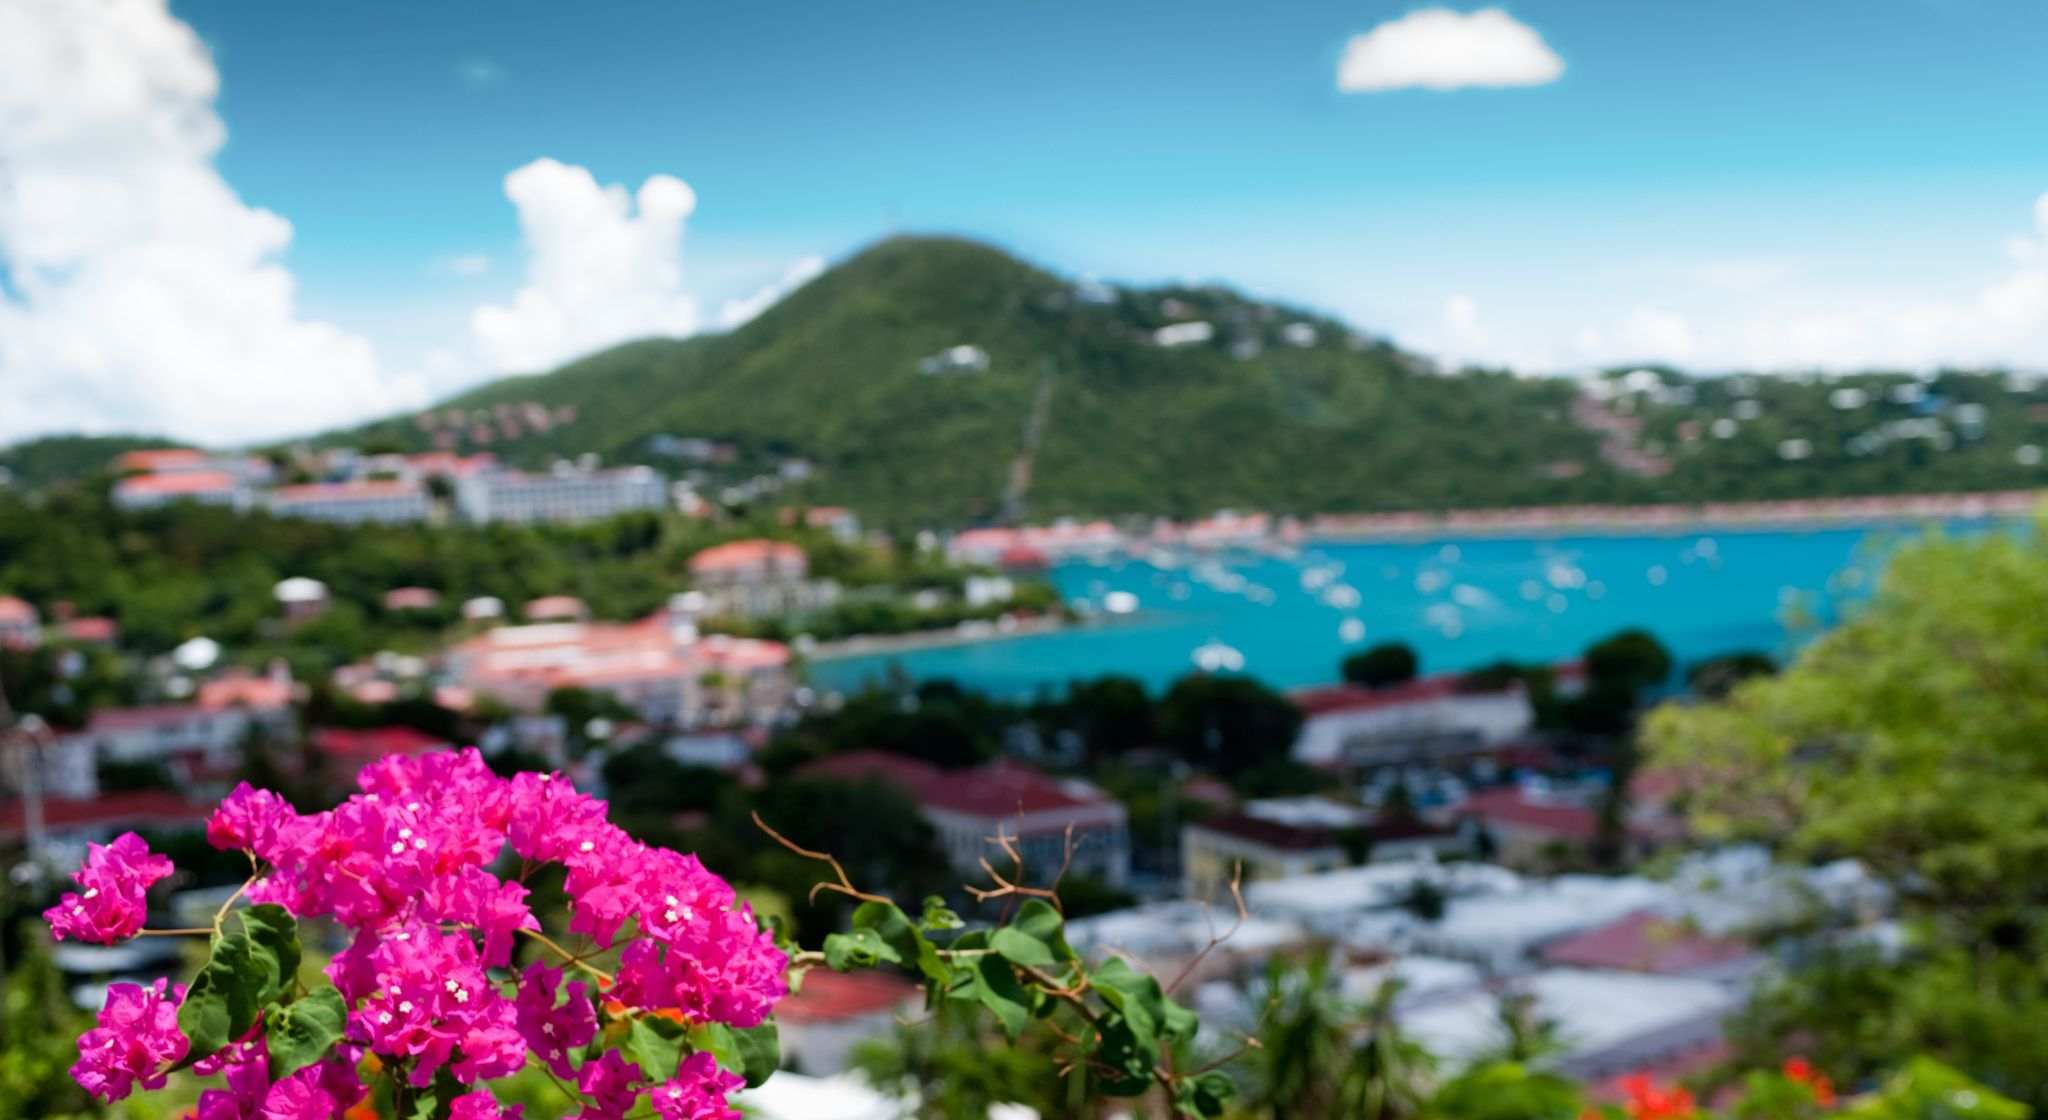 Town Background at St. Thomas US Virgin Island.